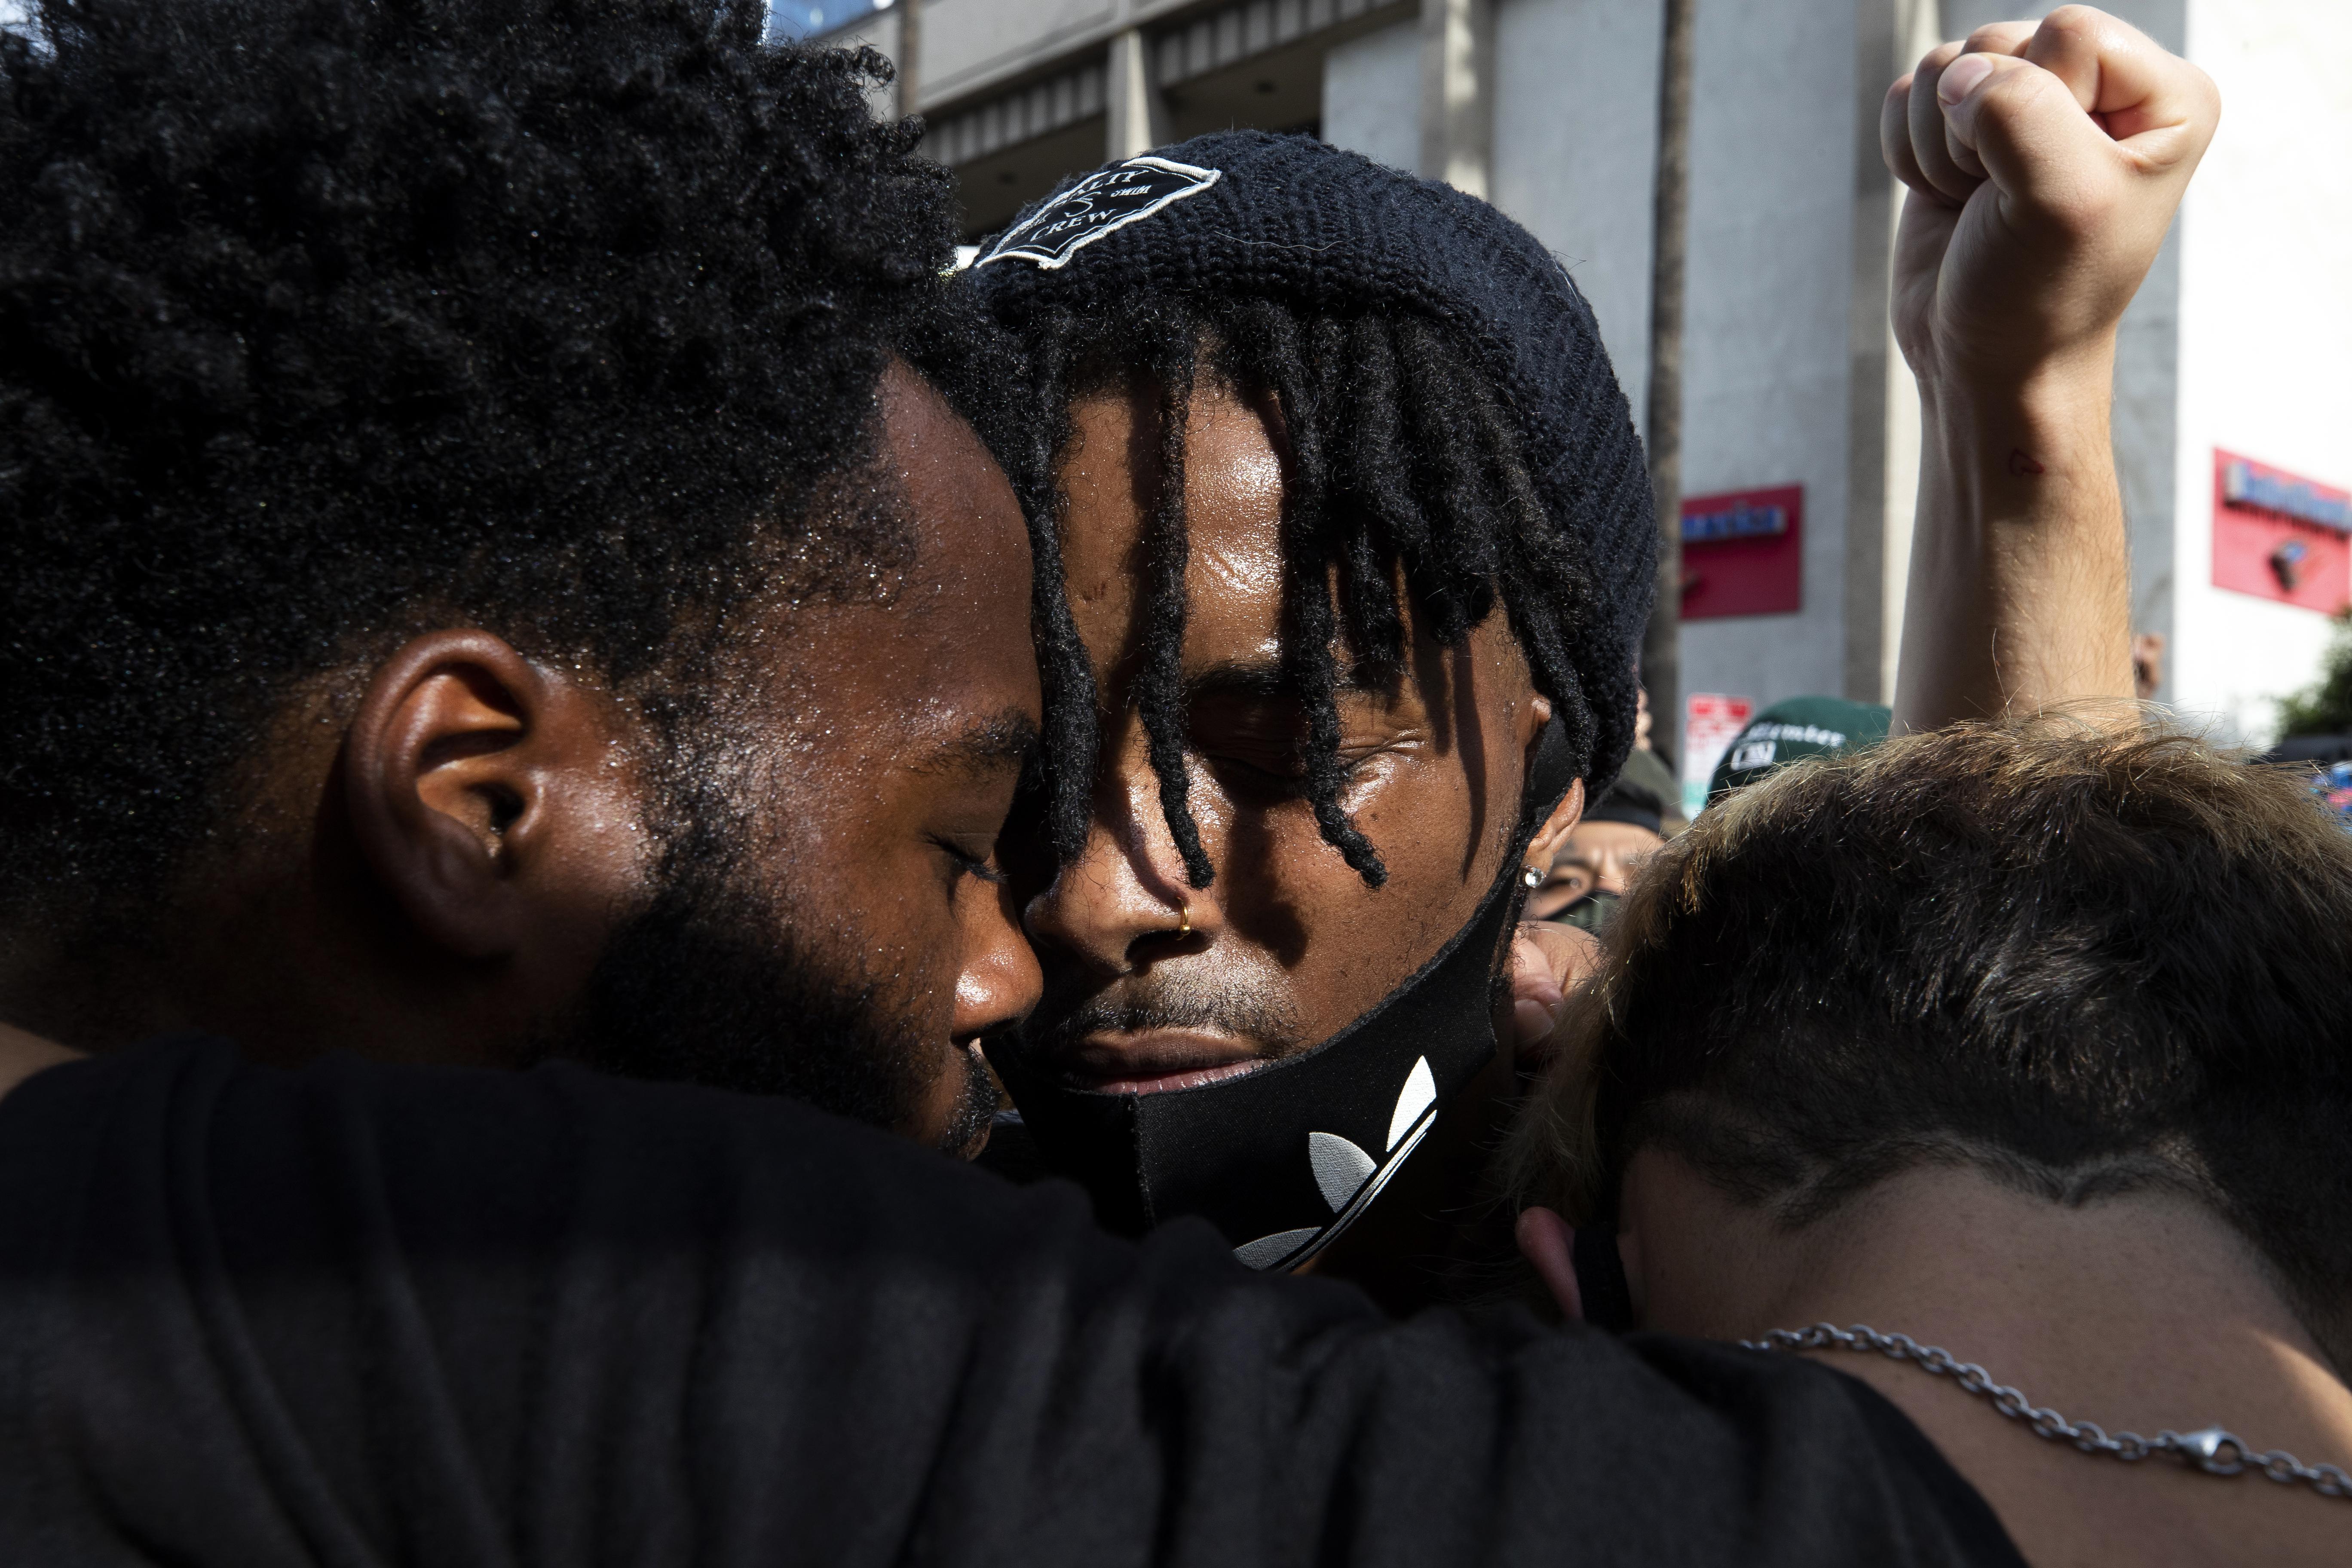 Two black protesters closing their eyes and putting their heads together as a white fist is held up in the shot.